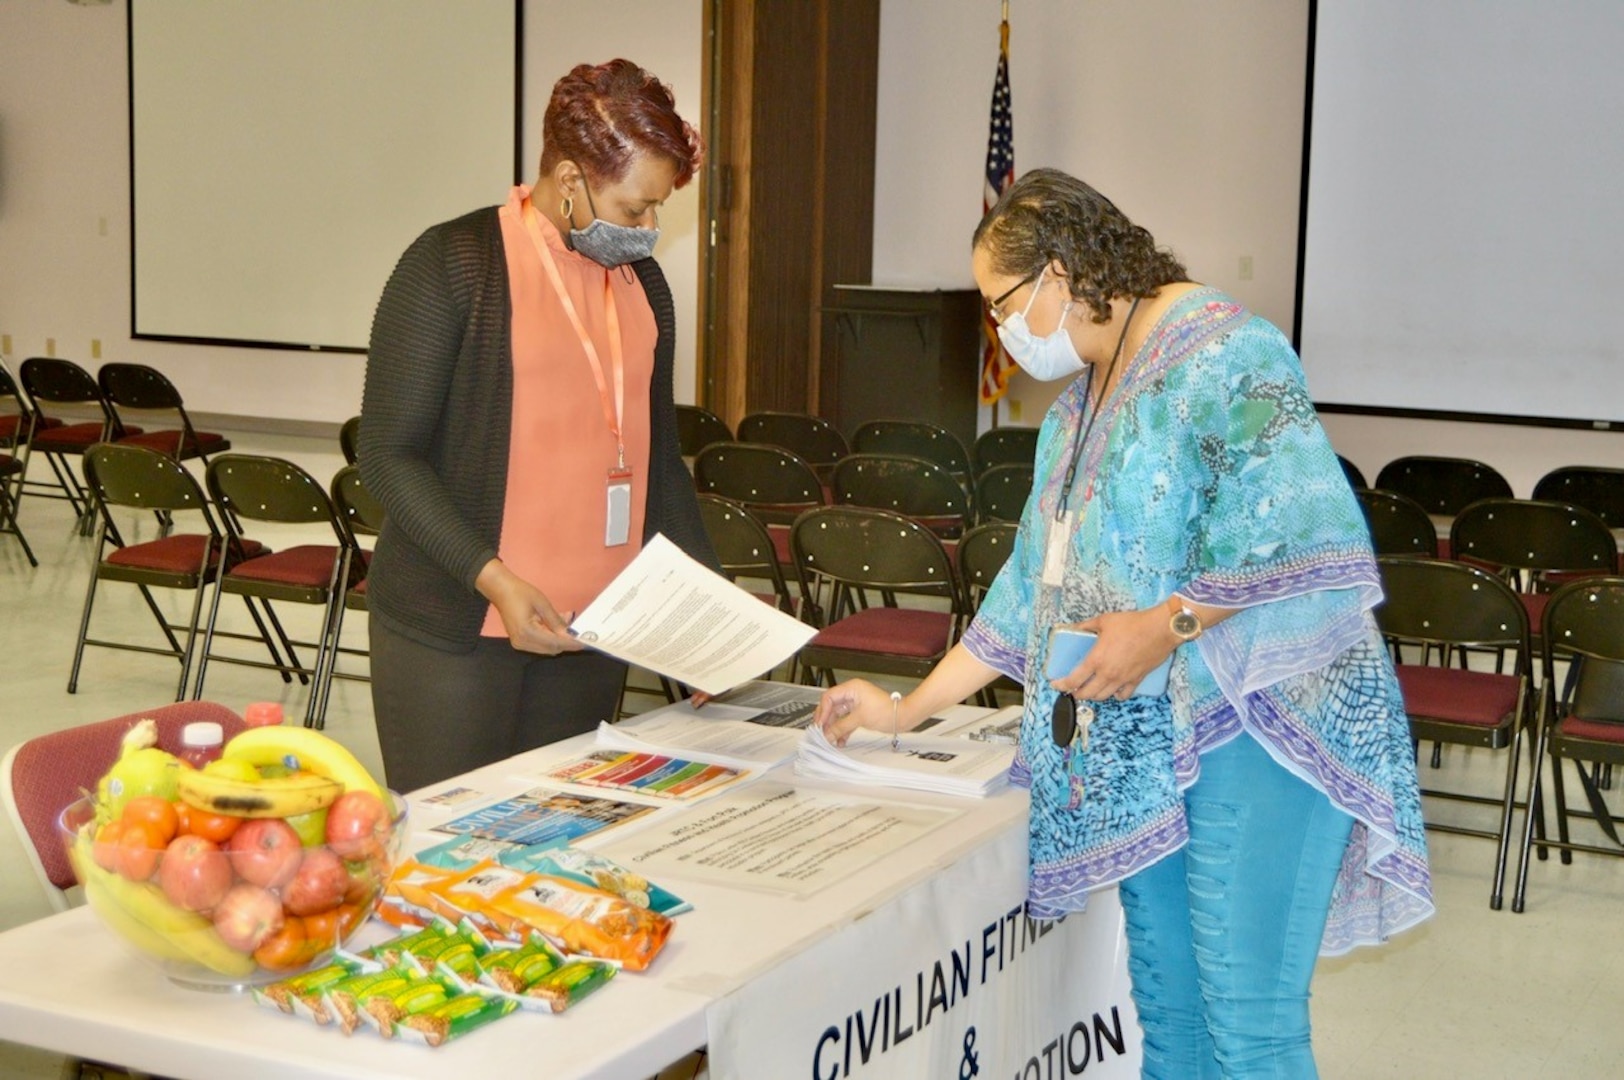 Luewana Hannon (left), community ready and resilient integrator, provides information to Georgia Louis (right) during the education and information fair at the Join Readiness Training Center and Fort Polk Army Community Service, Sept. 20.